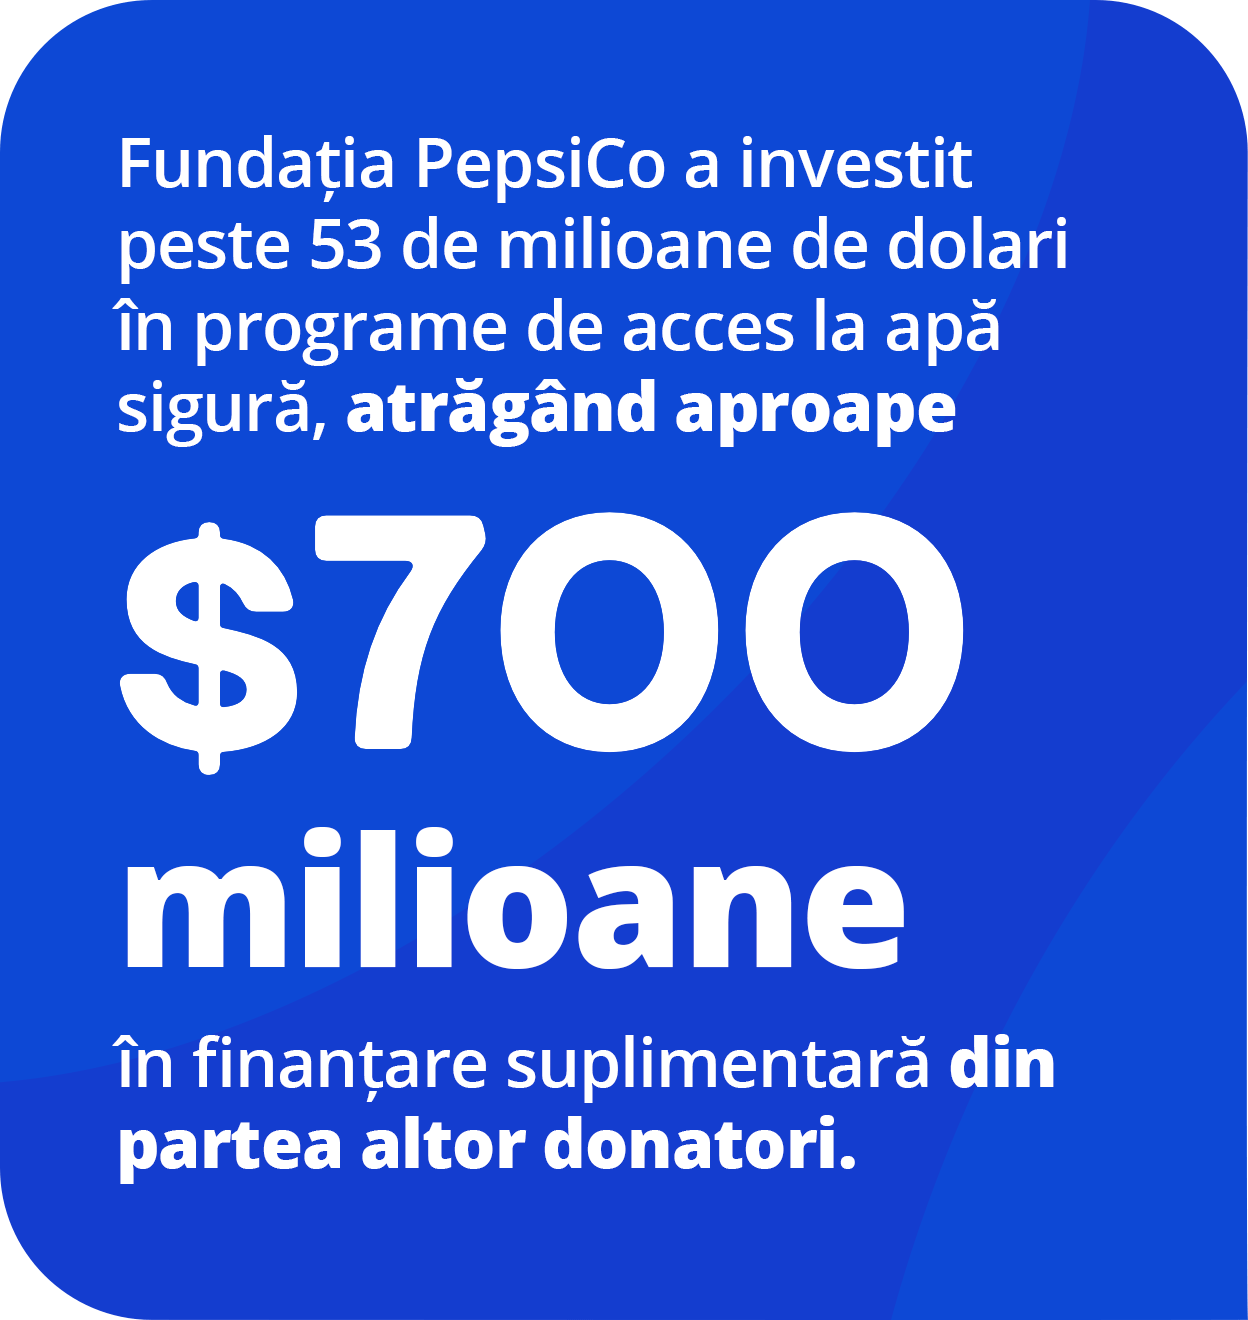 The PepsiCo Foundation has invested more than $53 million in safe water access programs, catalyzing nearly $700 million in additional funding from other donors.